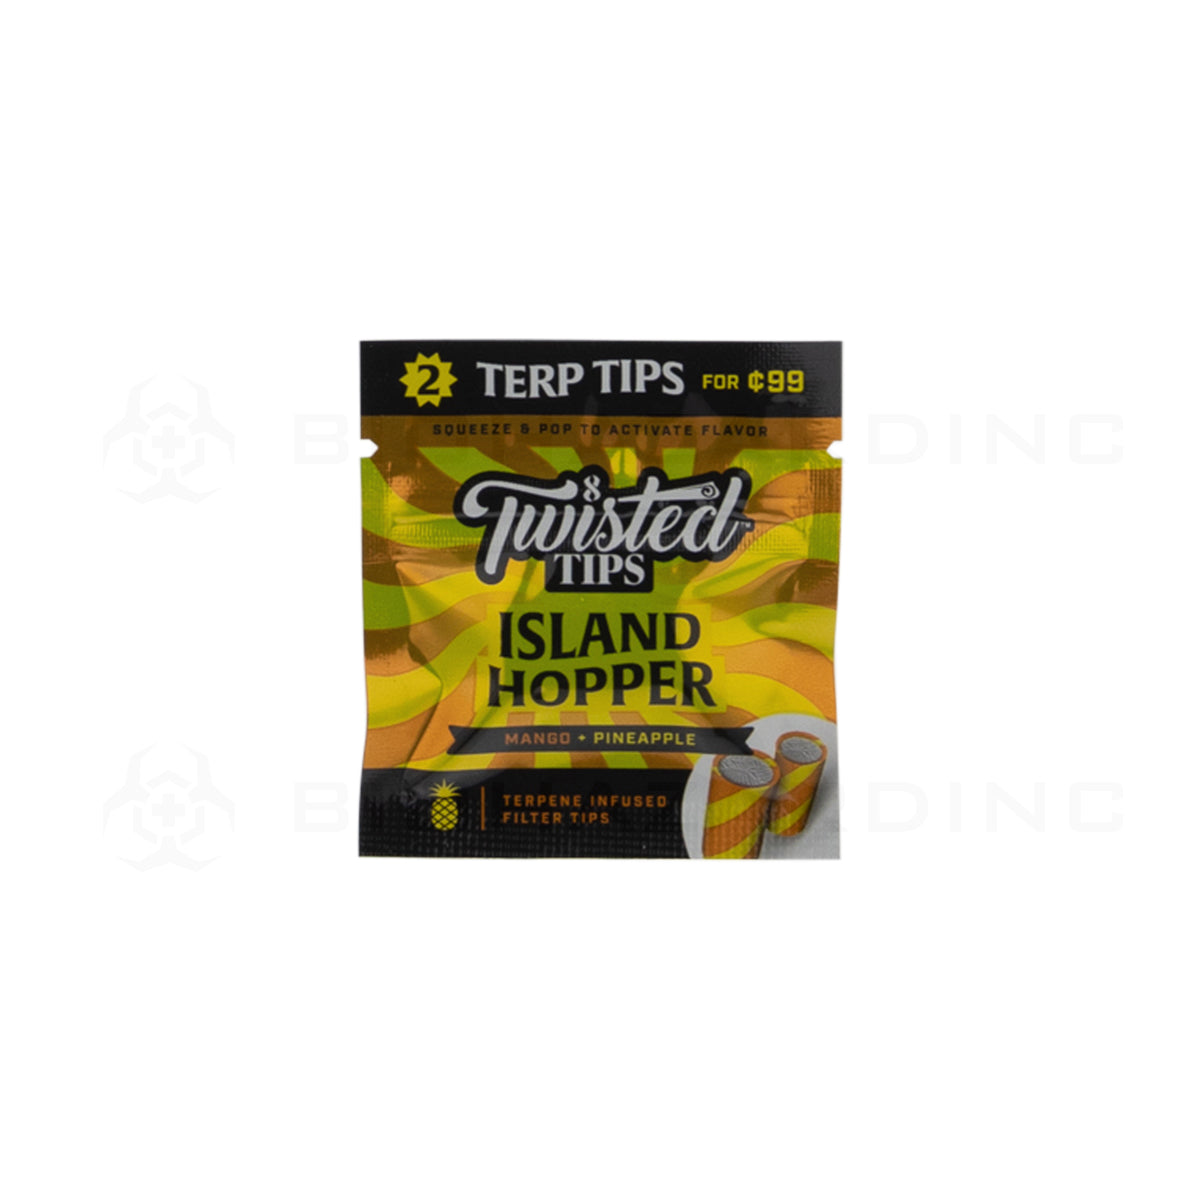 Twisted Tips | 'Retail Display' Terpene Infused 2 Packs | 24 Count Paper Tips Twisted Hemp Island Hopper  